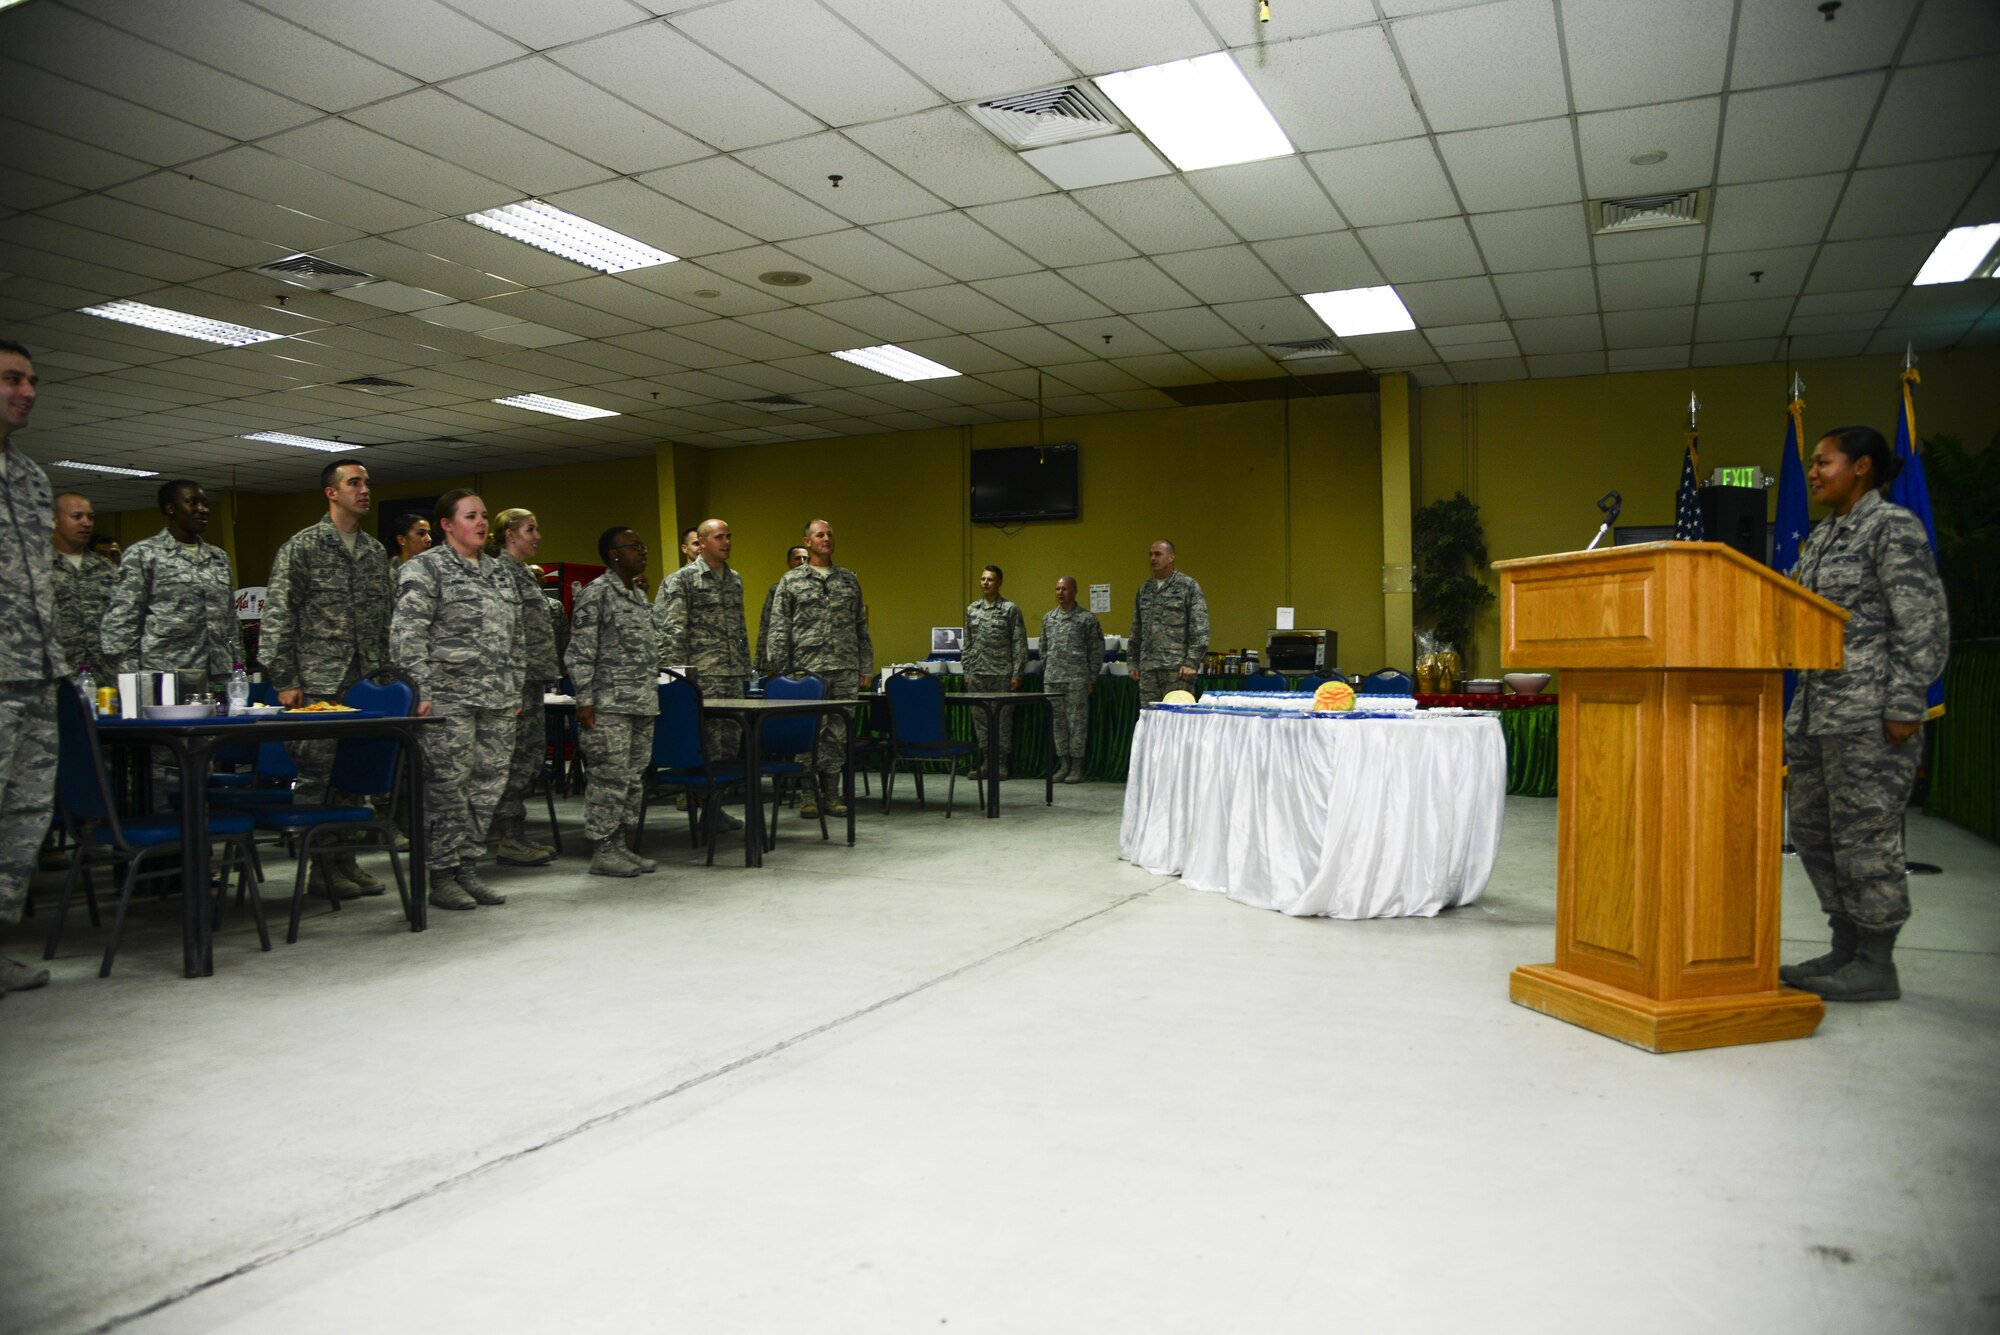 Airmen in the Independence Dining Facility stand at attention singing the Air Force Song during the cake cutting ceremony Sept. 18, 2015, at Al Udeid Air Base, Qatar. The cake cutting ceremony is traditionally performed by the oldest and youngest Airman. This year marks 68 years of military superiority through air power. (U.S. Air Force photo by Tech. Sgt. Rasheen Douglas)